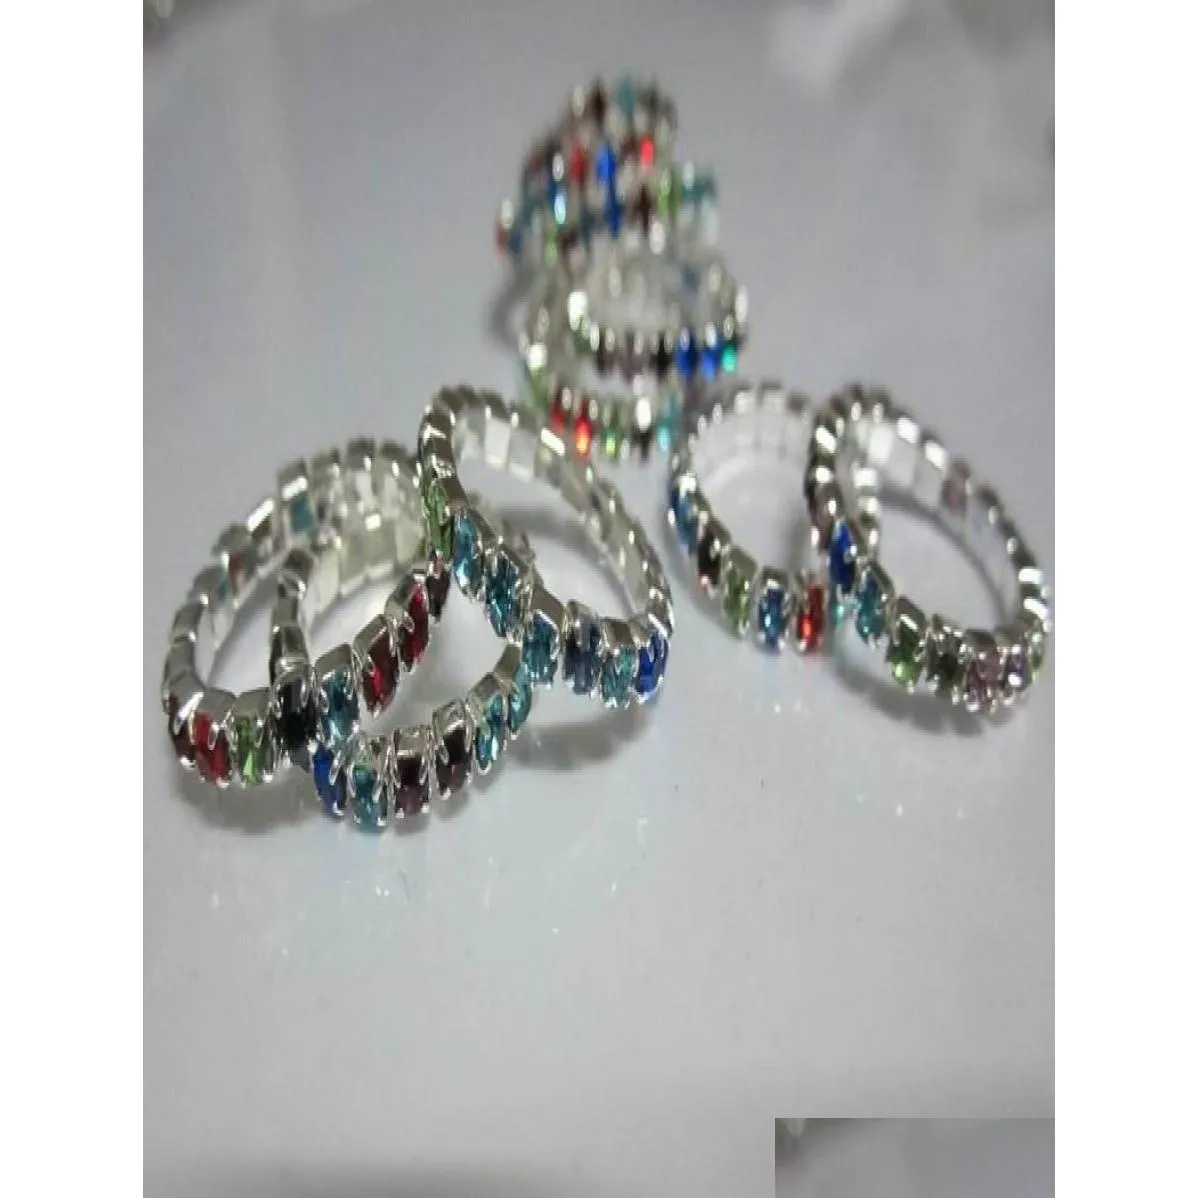 Toe Rings Rhinestone Ring 12Colors Stones Mixed Blingbling Foot Jewelry4328392 Drop Delivery Jewelry Body Dh6Gi